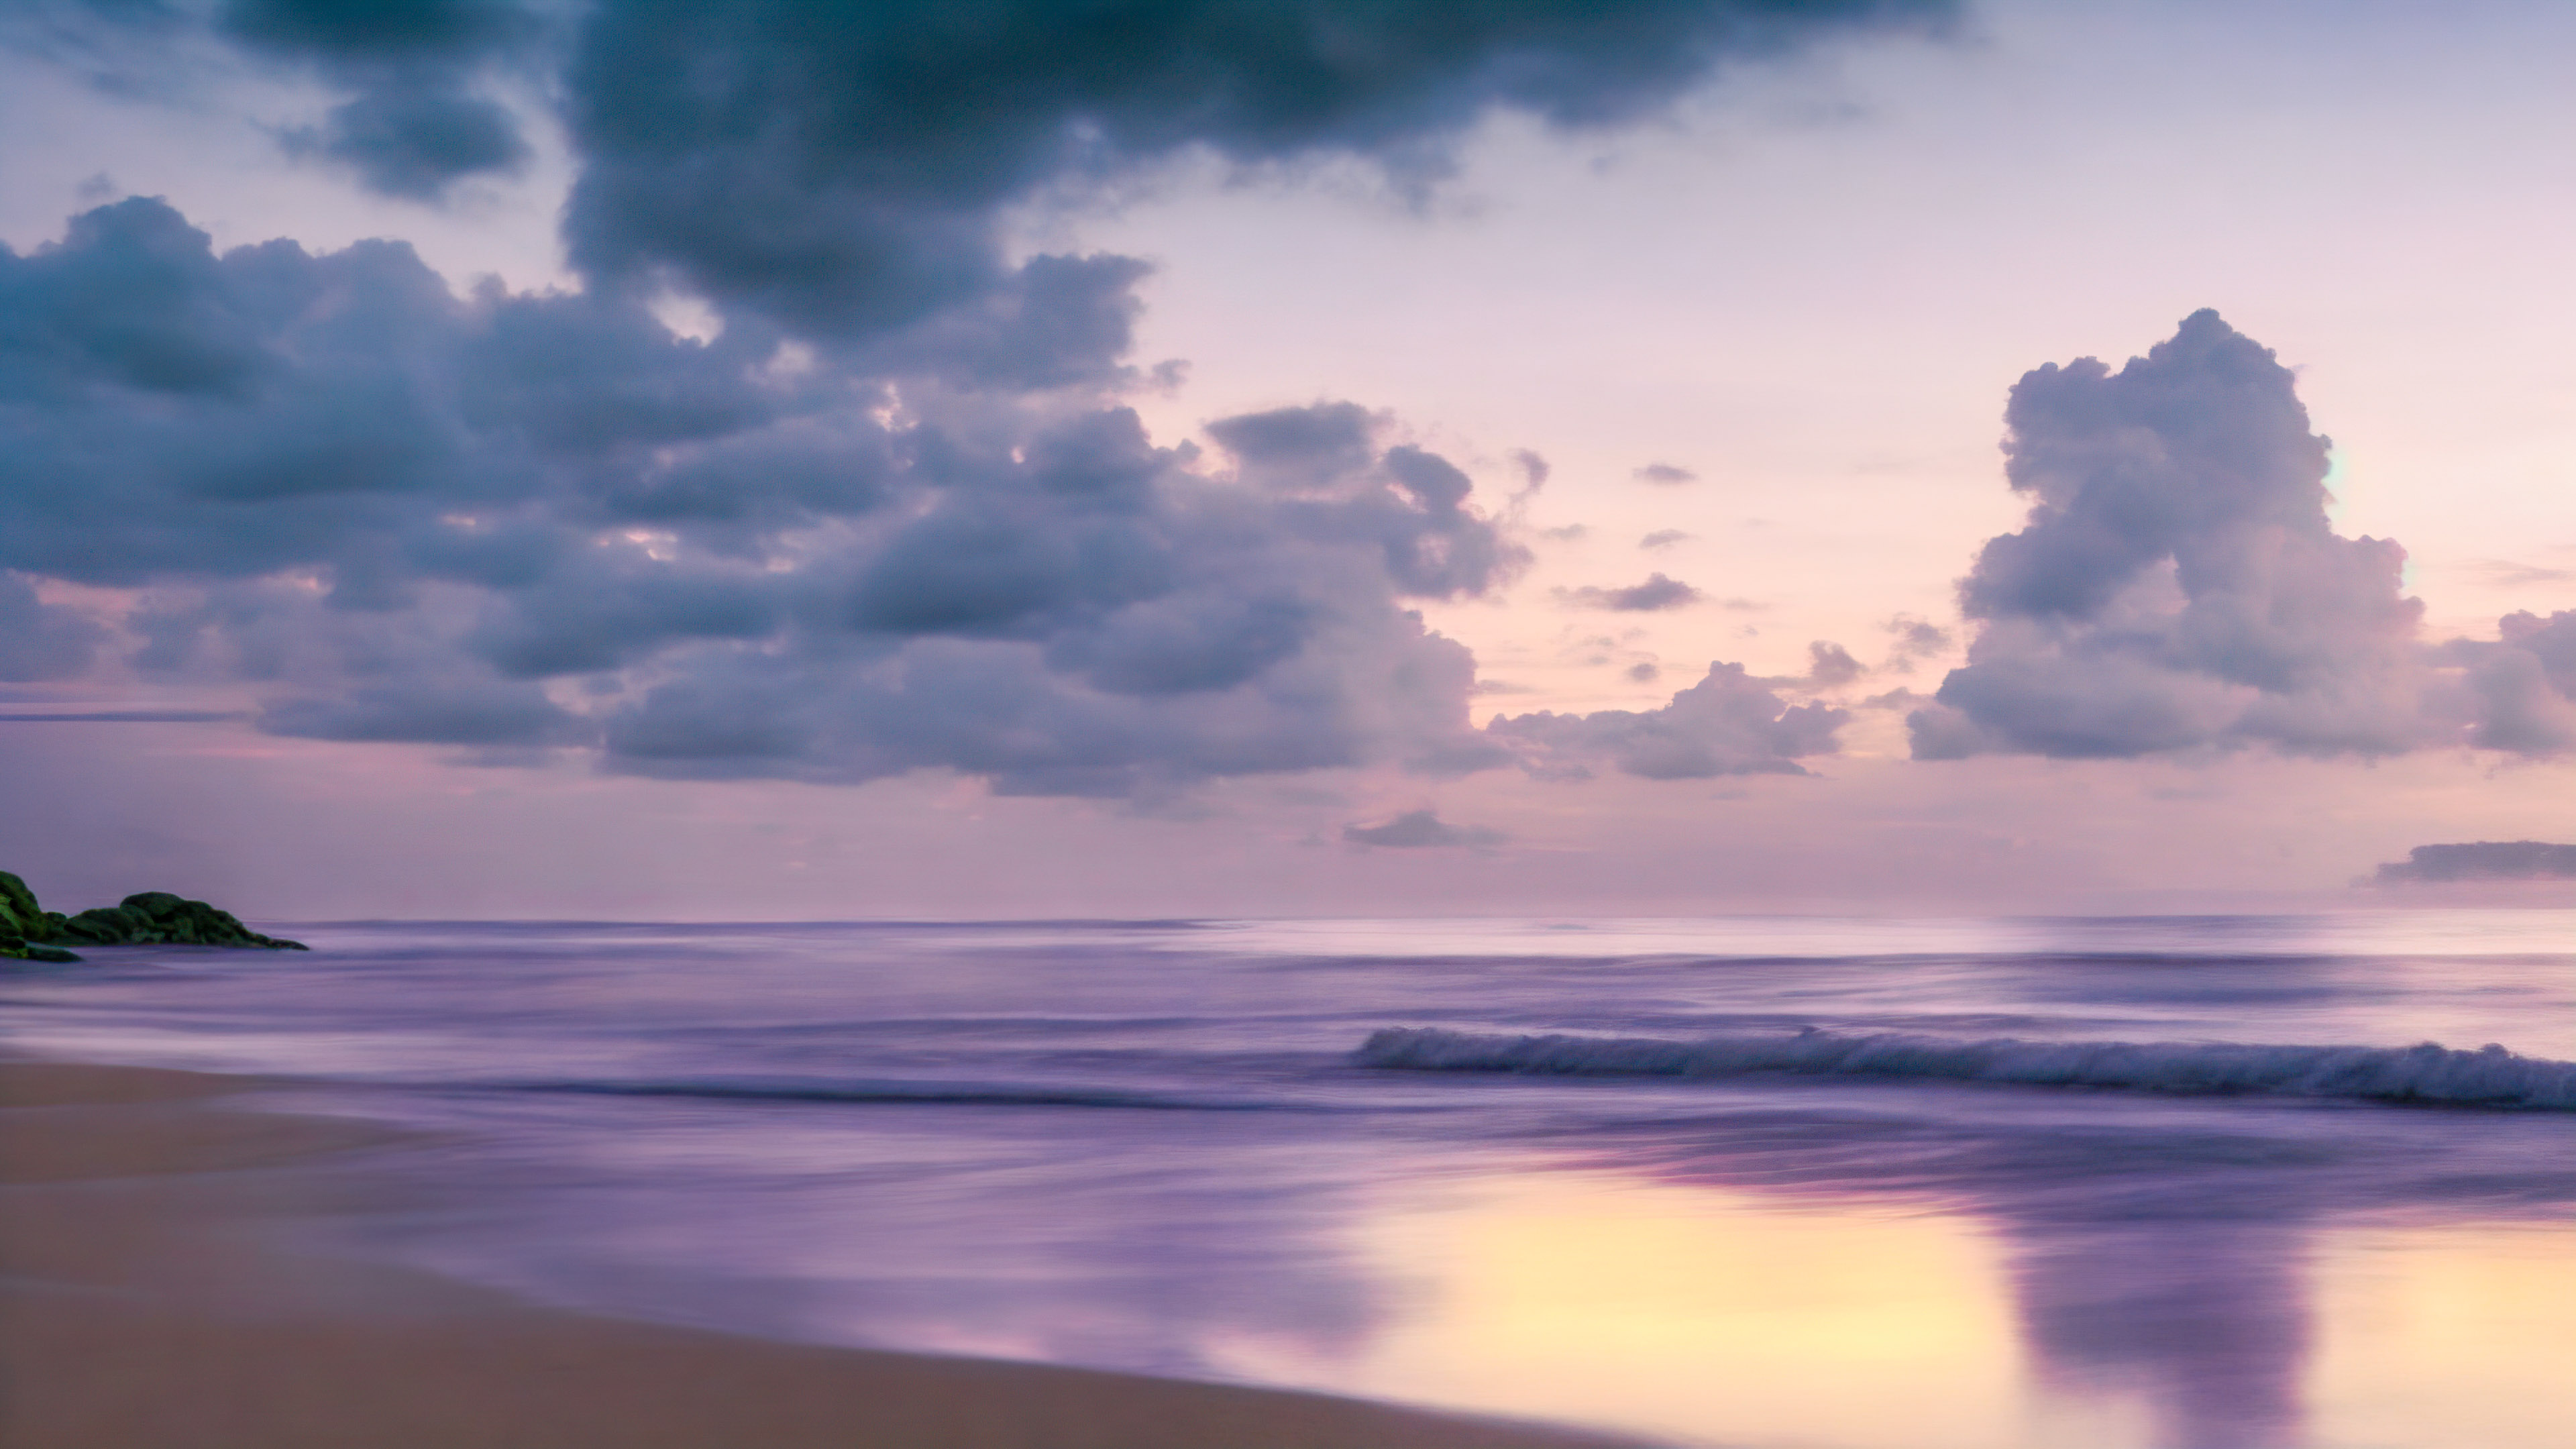 Transform your device’s screen with sky background in 4K, showcasing a tranquil beach at twilight, with the sky painted in shades of purple and pink.